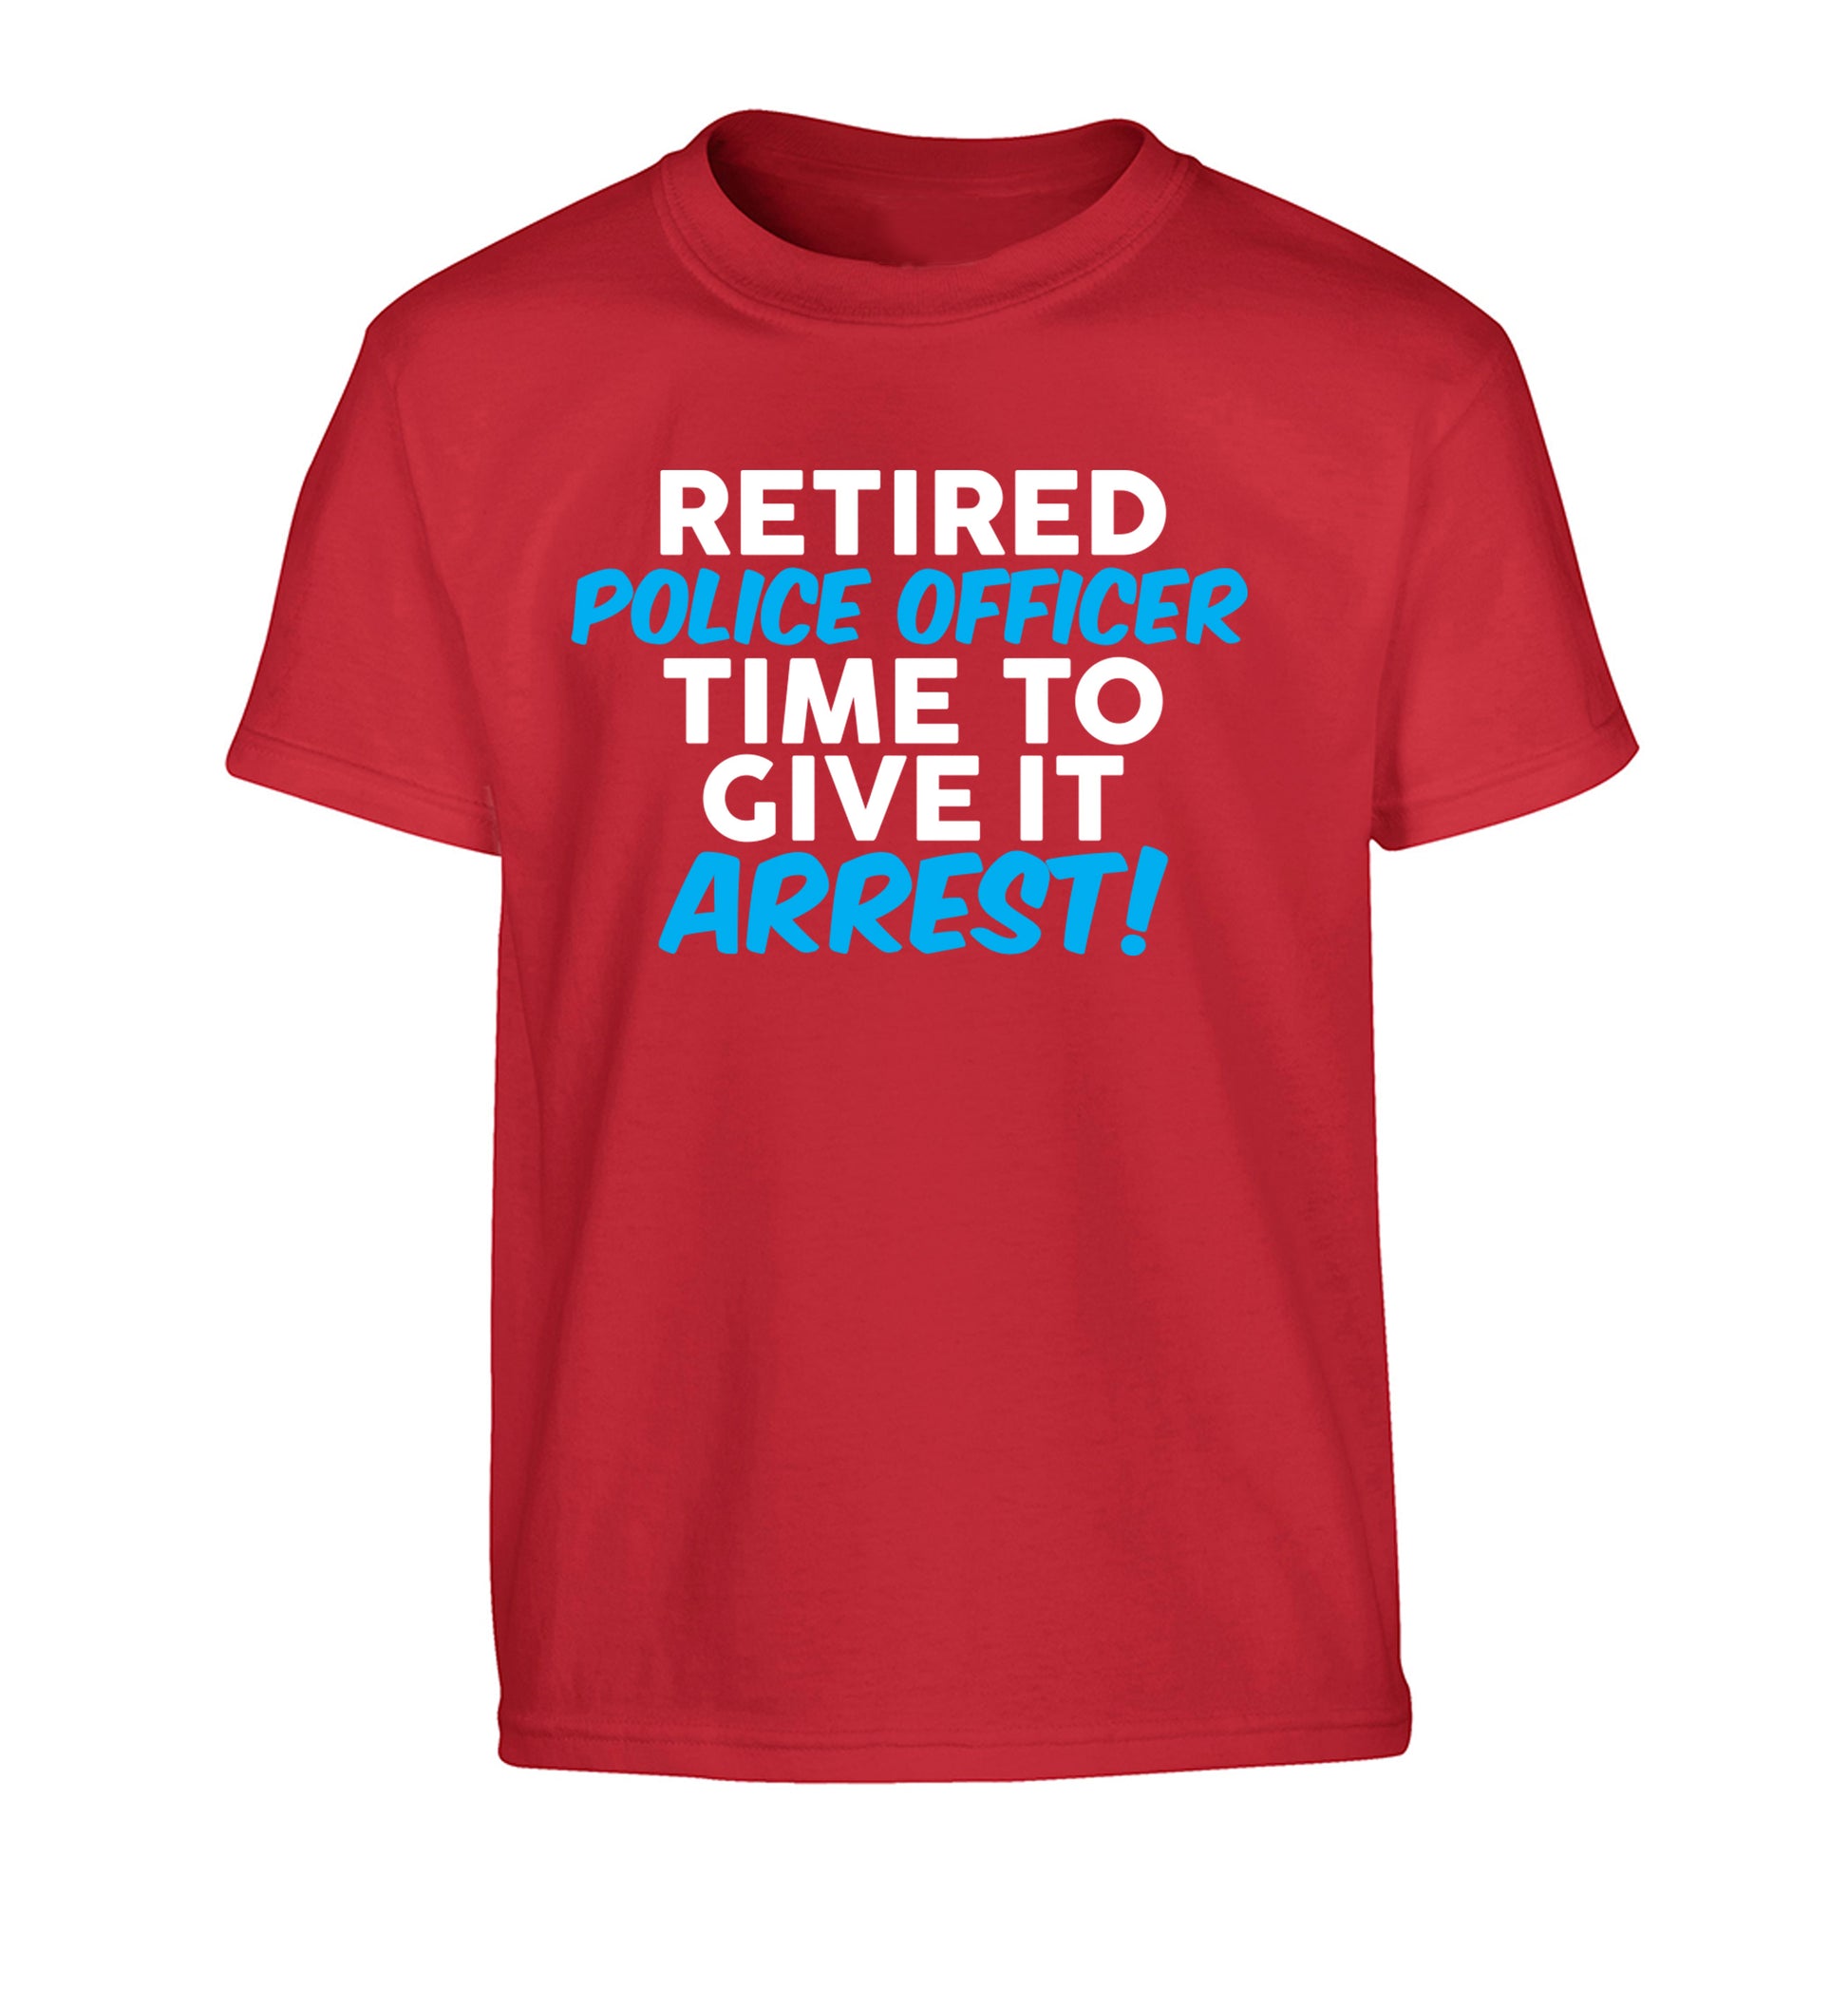 Retired police officer time to give it arrest Children's red Tshirt 12-13 Years